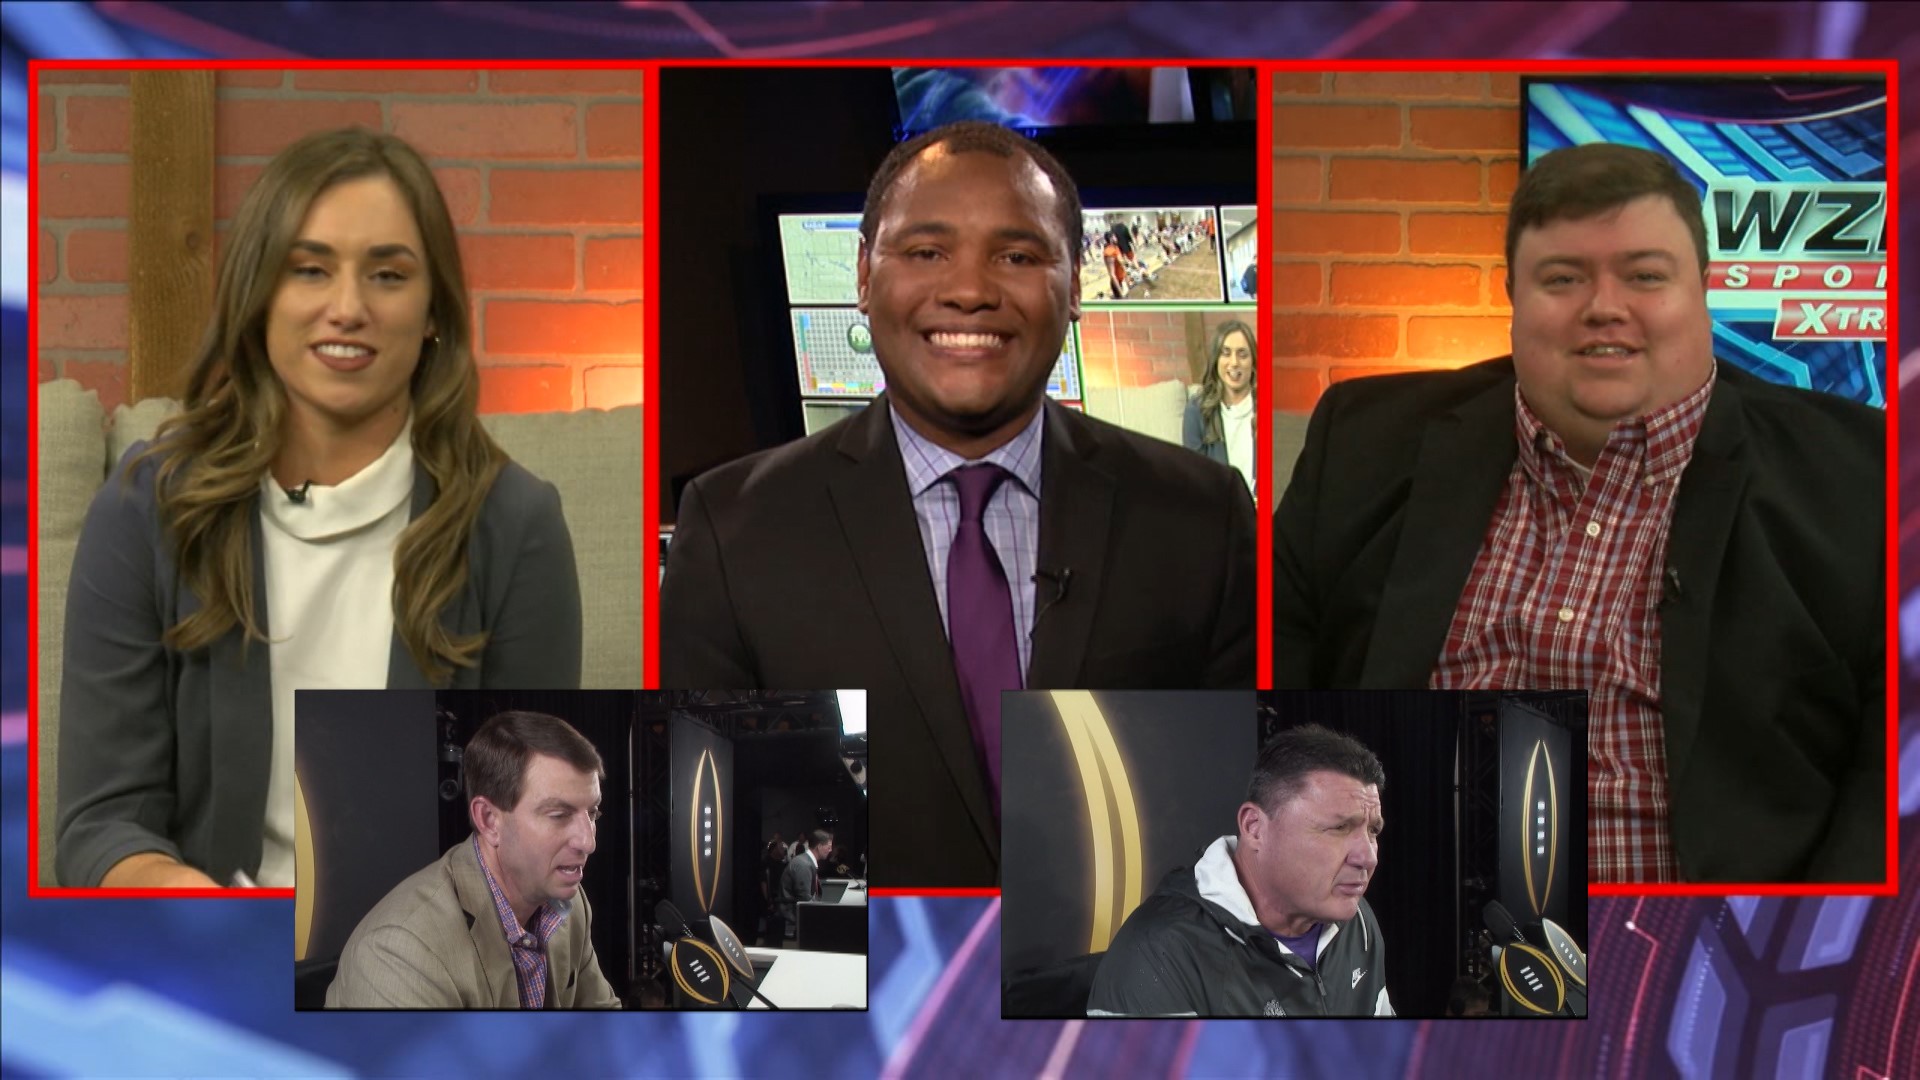 LSU and Clemson are squaring off for the 2020 National Title Monday night in New Orleans. The sports crew along with Arky Shea gave predictions and keys to the game for both teams. Plus some impressions of LSU Head Coach Ed Orgeron were on display as well.